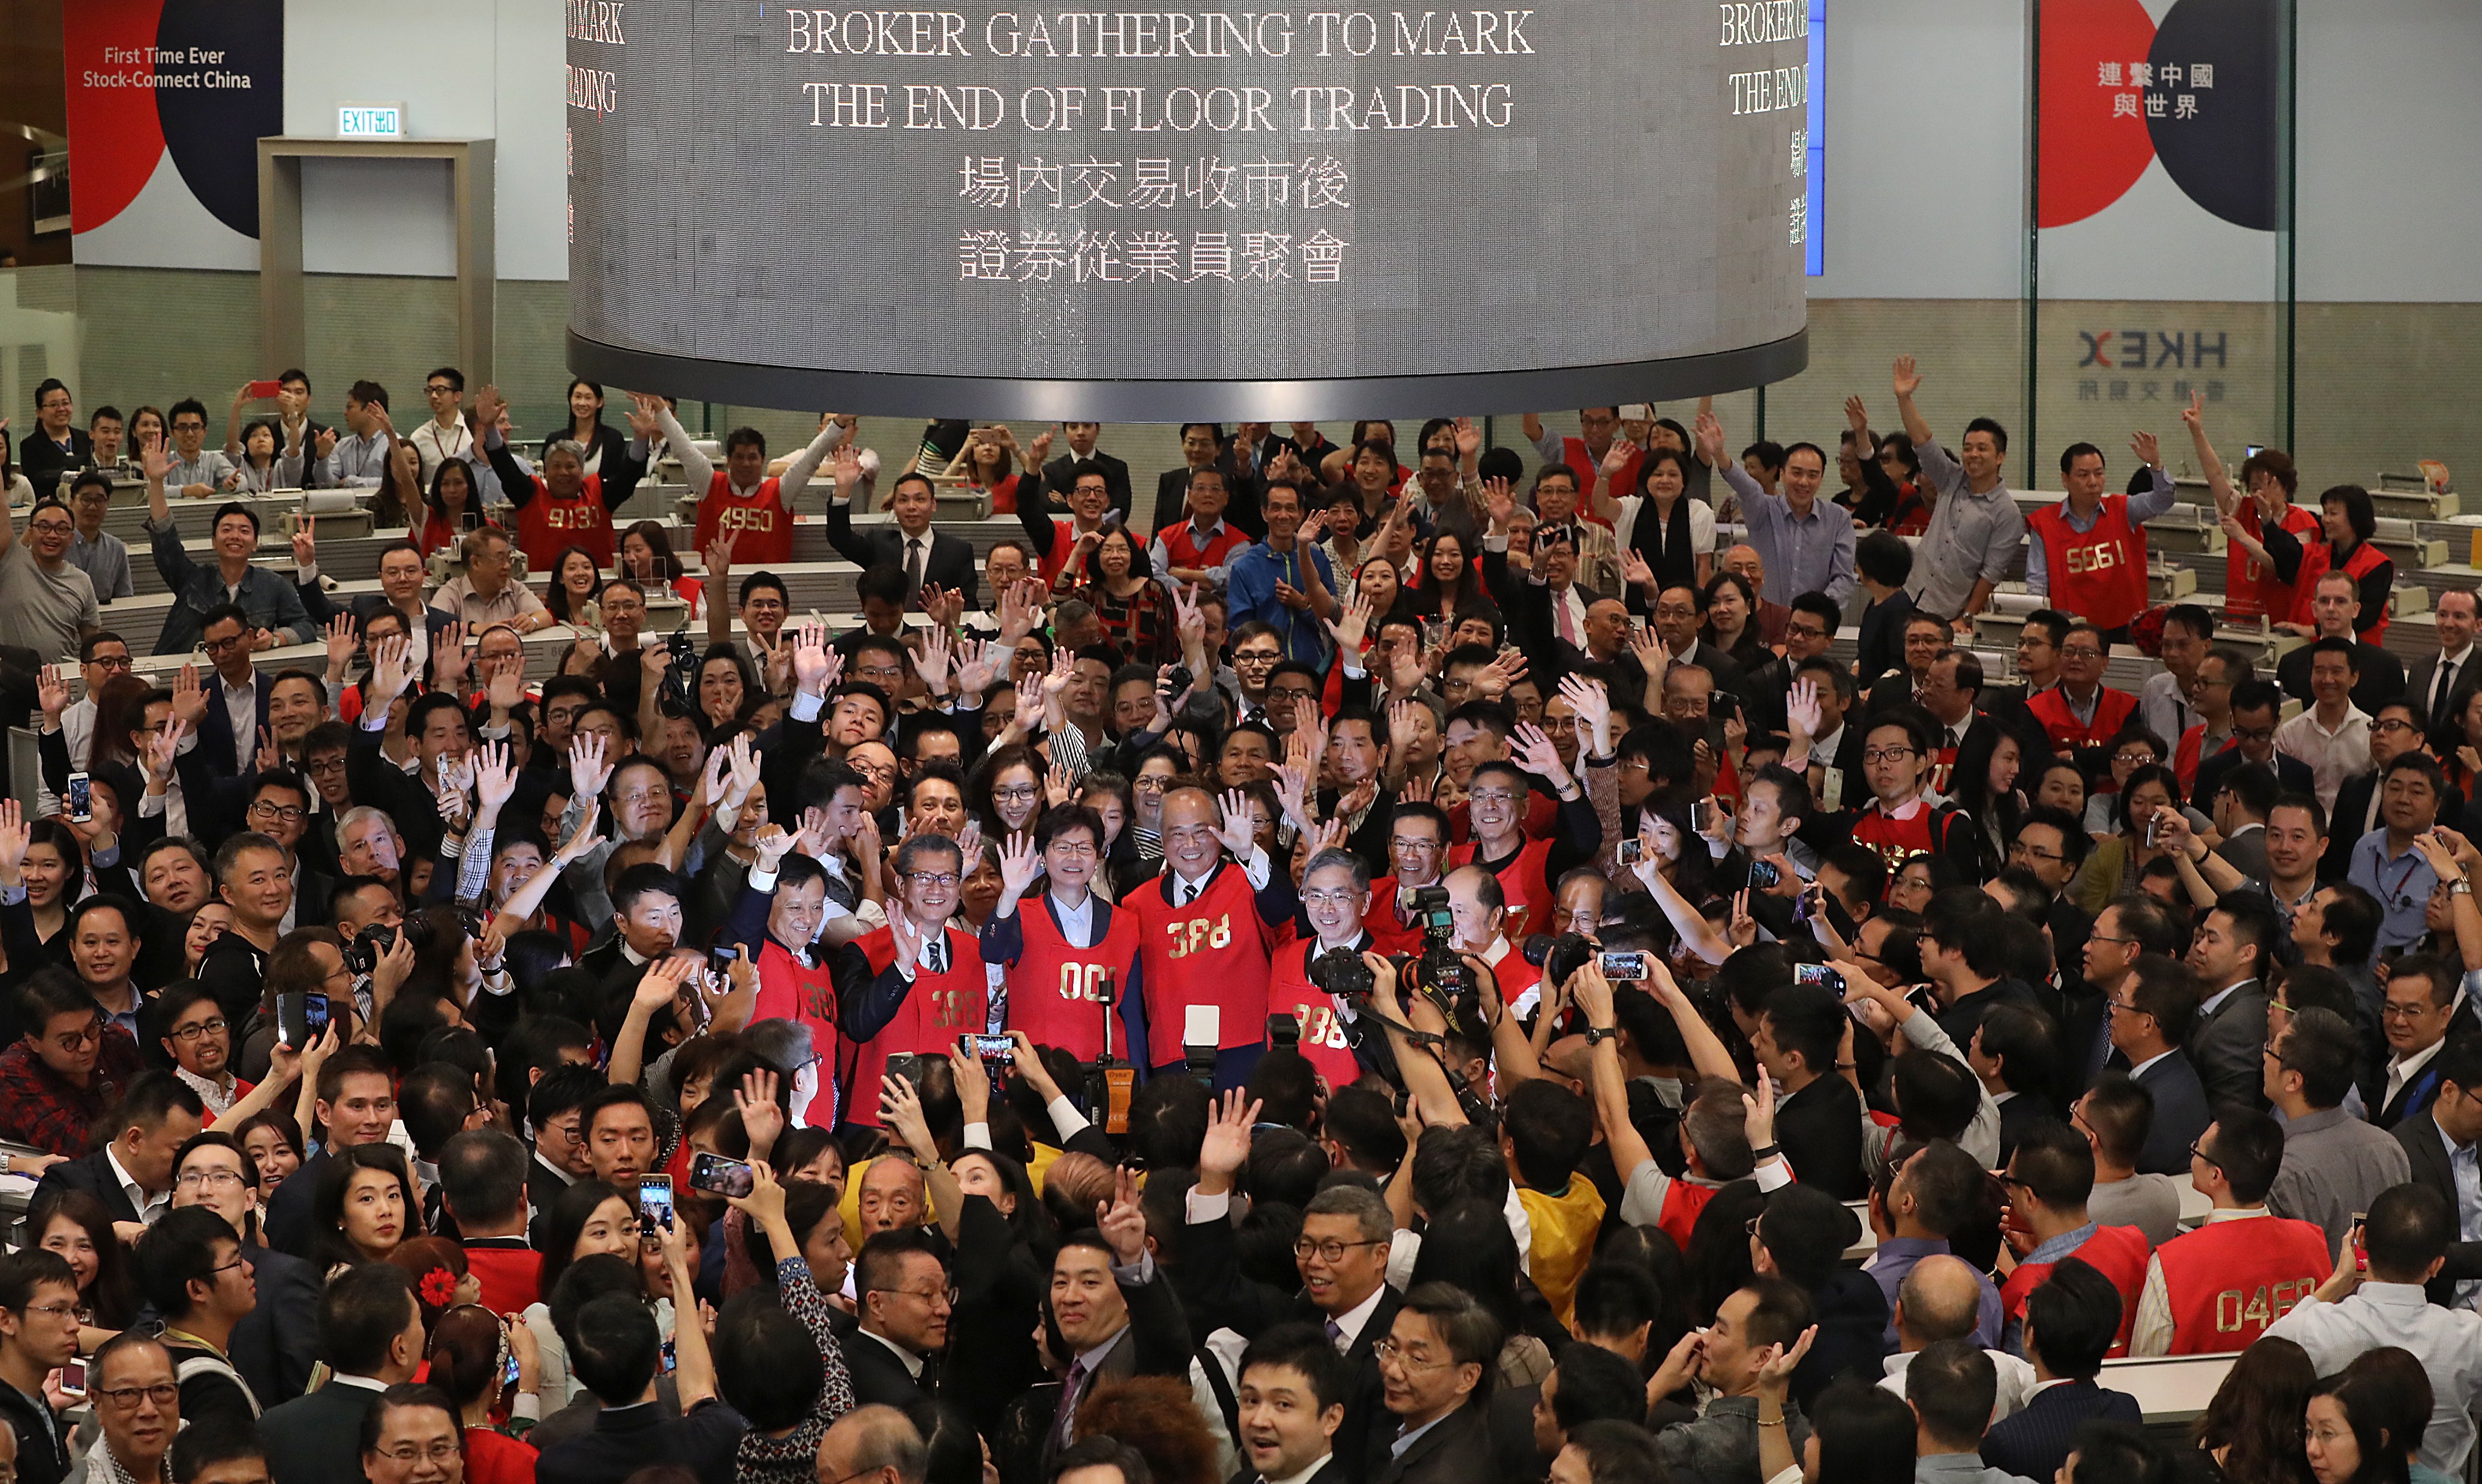 The end of an era, as floor trading ended at the Hong Kong stock exchange on October 27, 2017. All floor traders gathered alongside executives of the Hong Kong Exchanges & Clearing Limited to mark the ceremony. Photo: SCMP/Edward Wong.